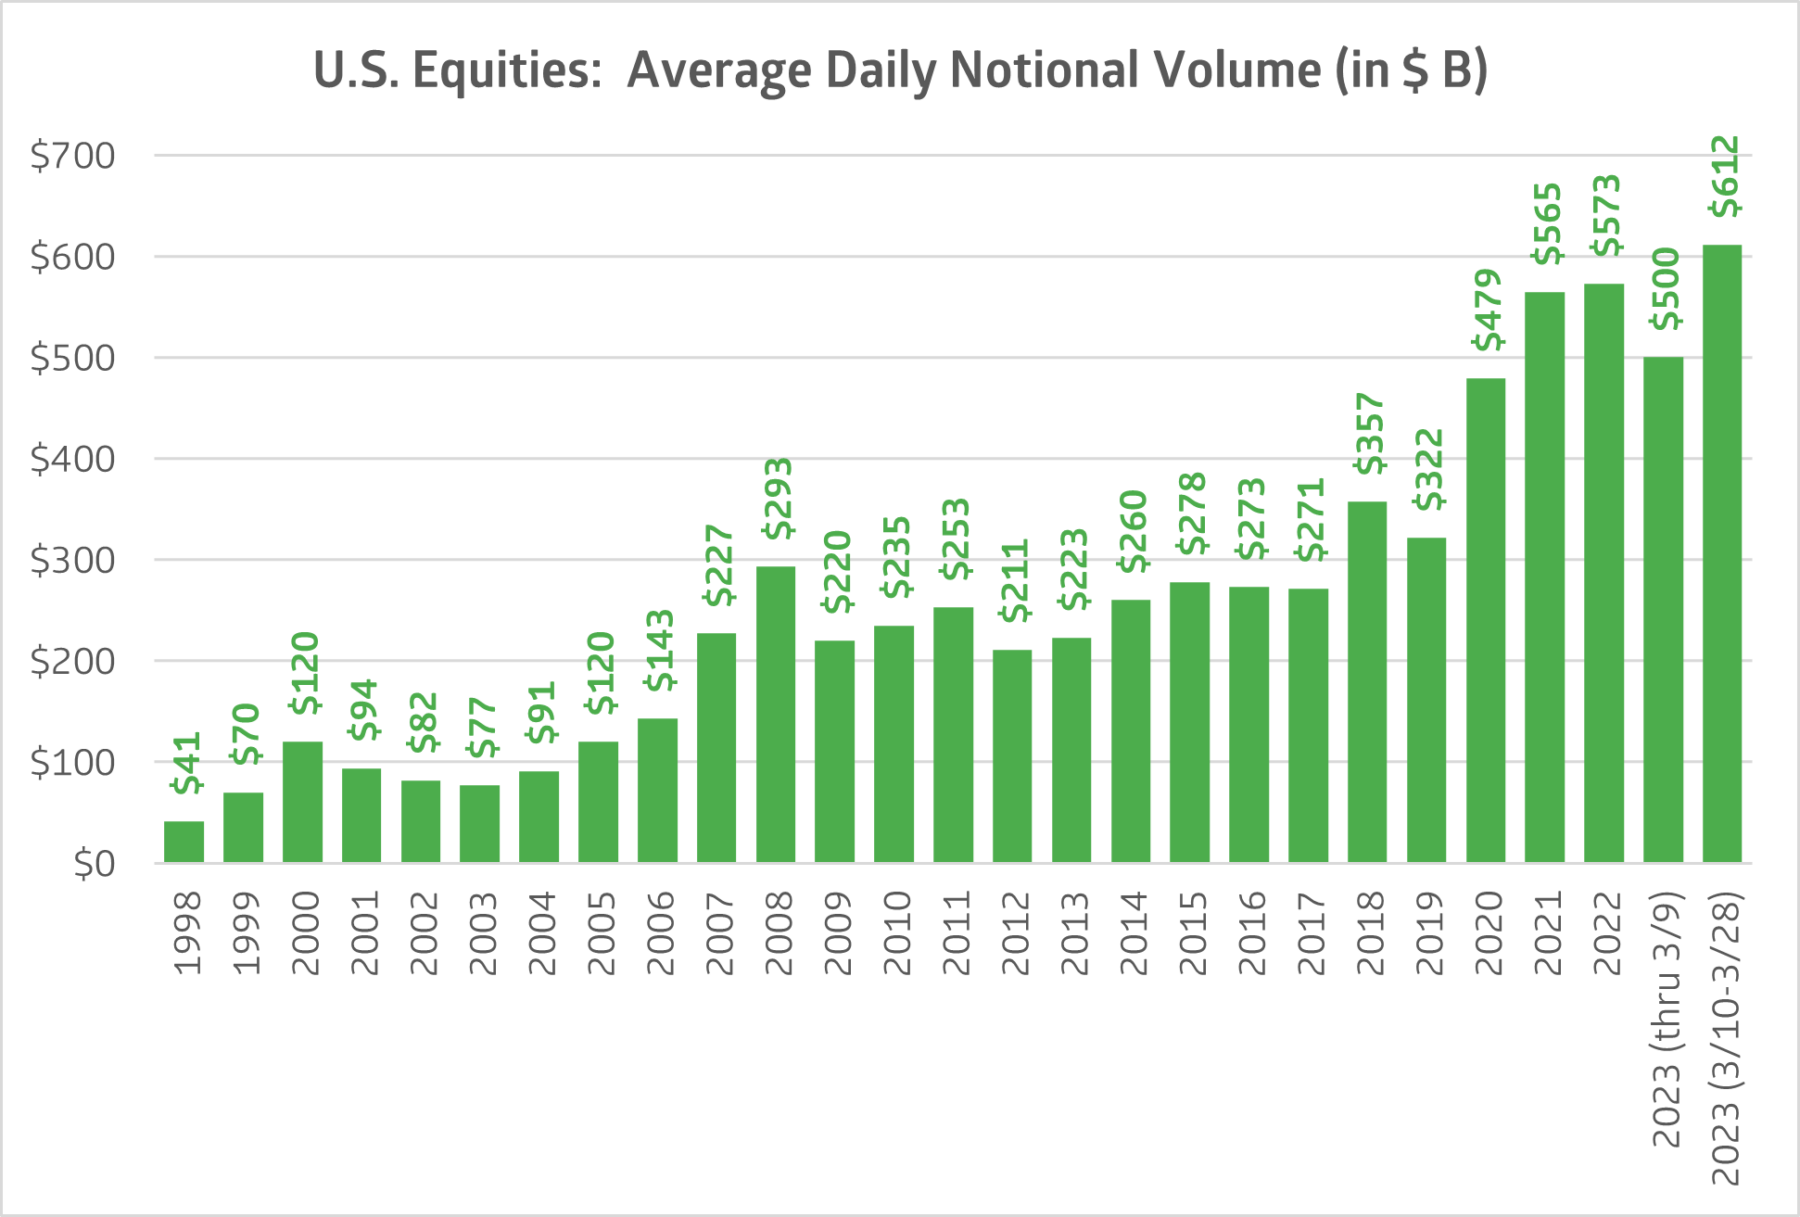 U.S. equities average daily notional volume in billions from 1998 - March 2023